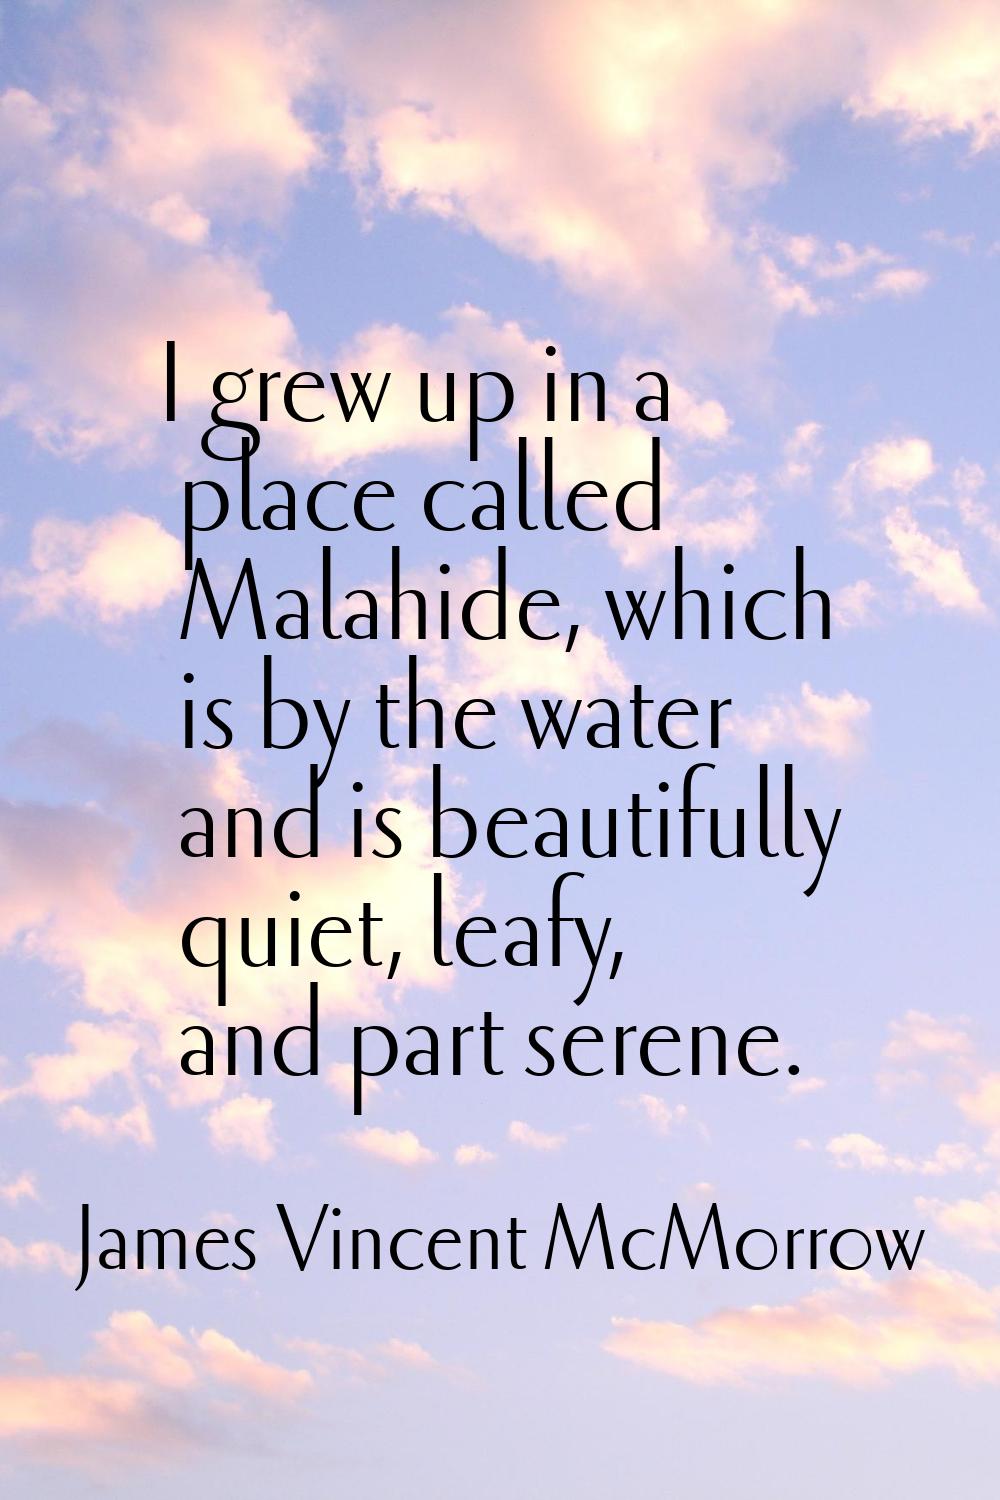 I grew up in a place called Malahide, which is by the water and is beautifully quiet, leafy, and pa